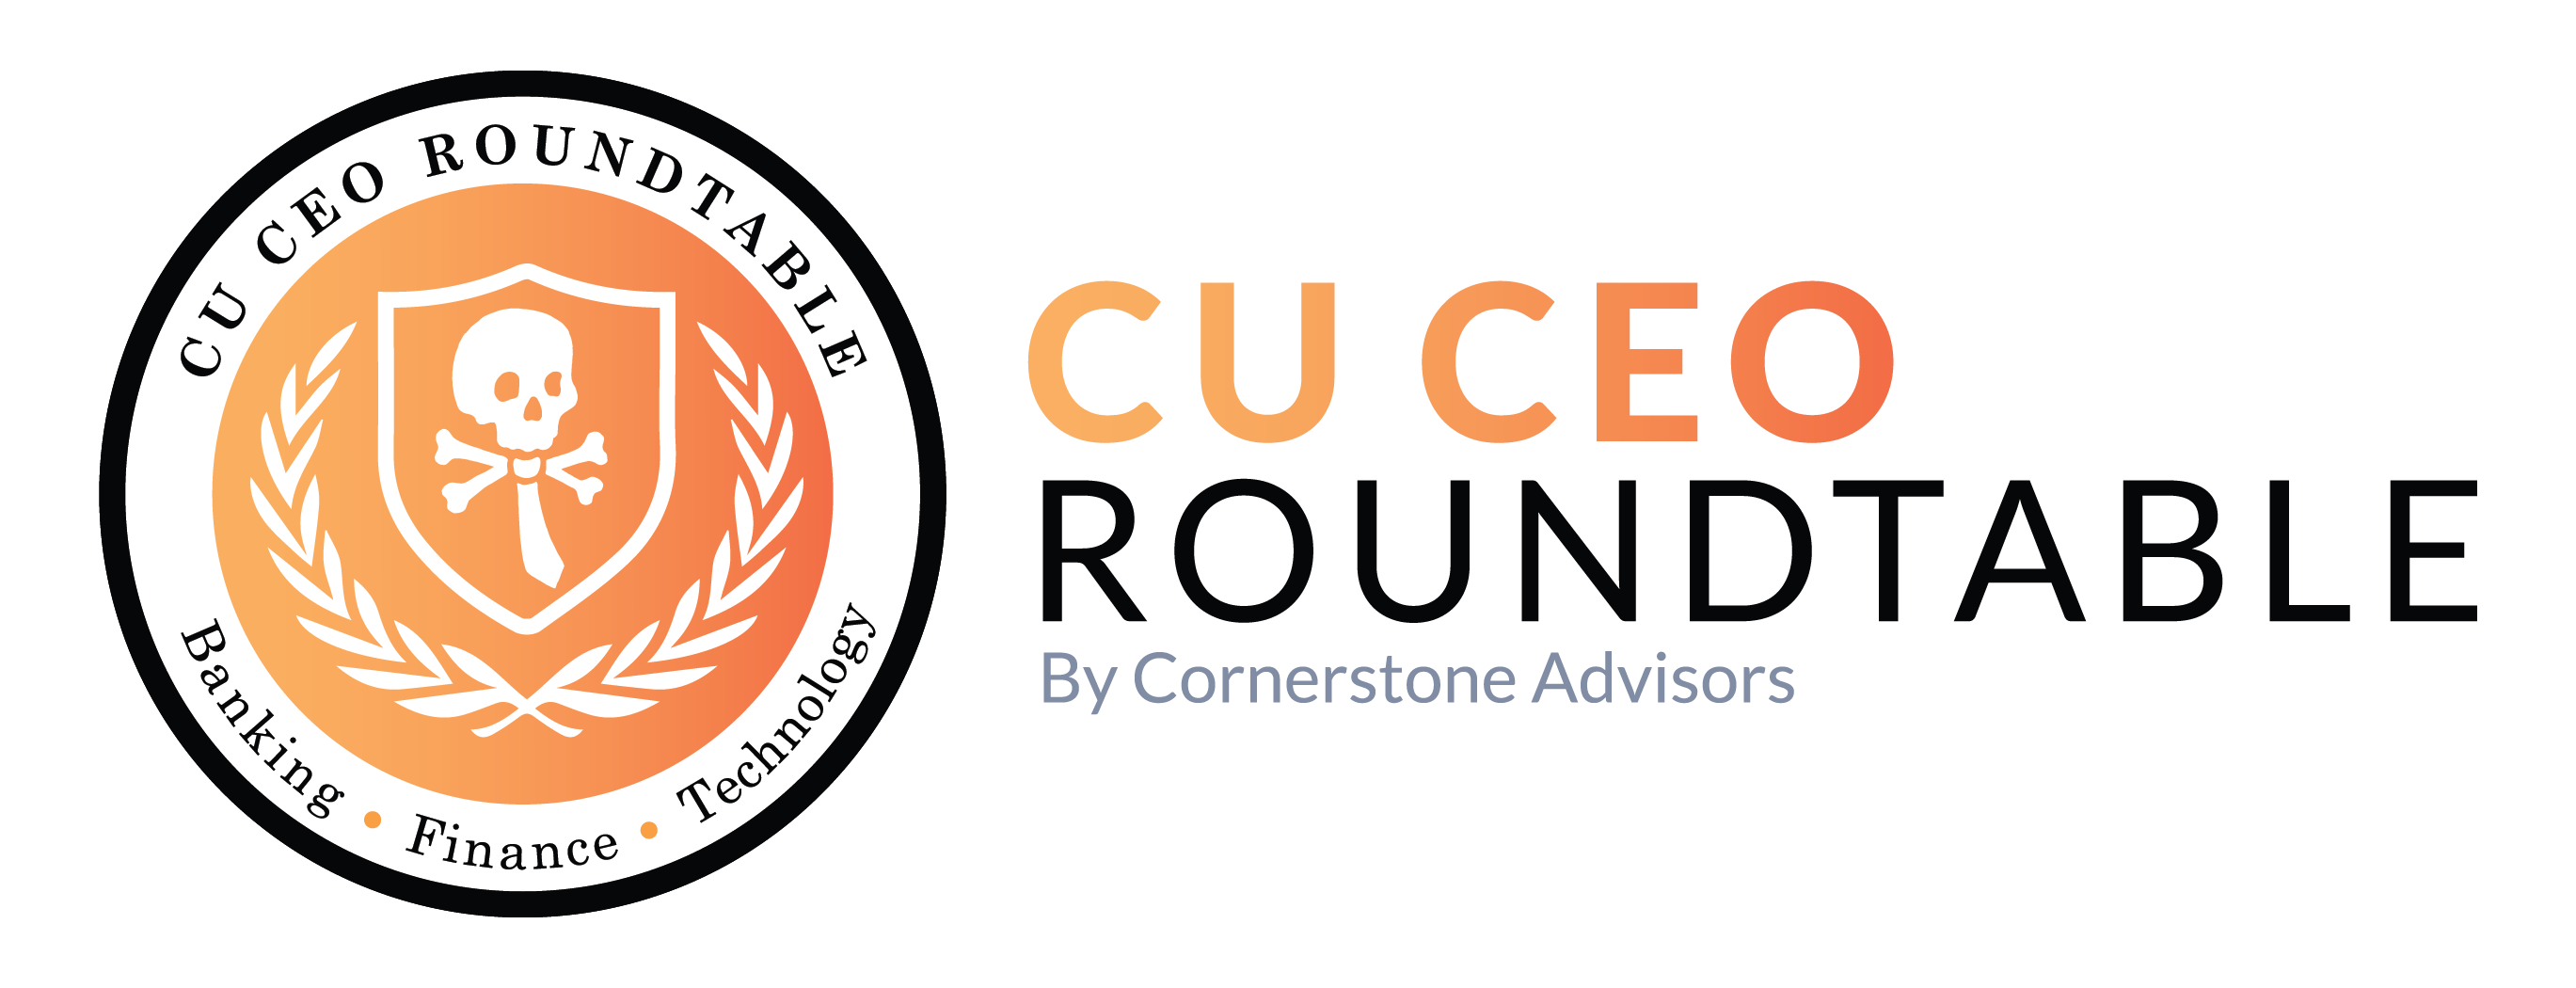 CU CEO Roundtable - Logo - Horizontal - Full Color